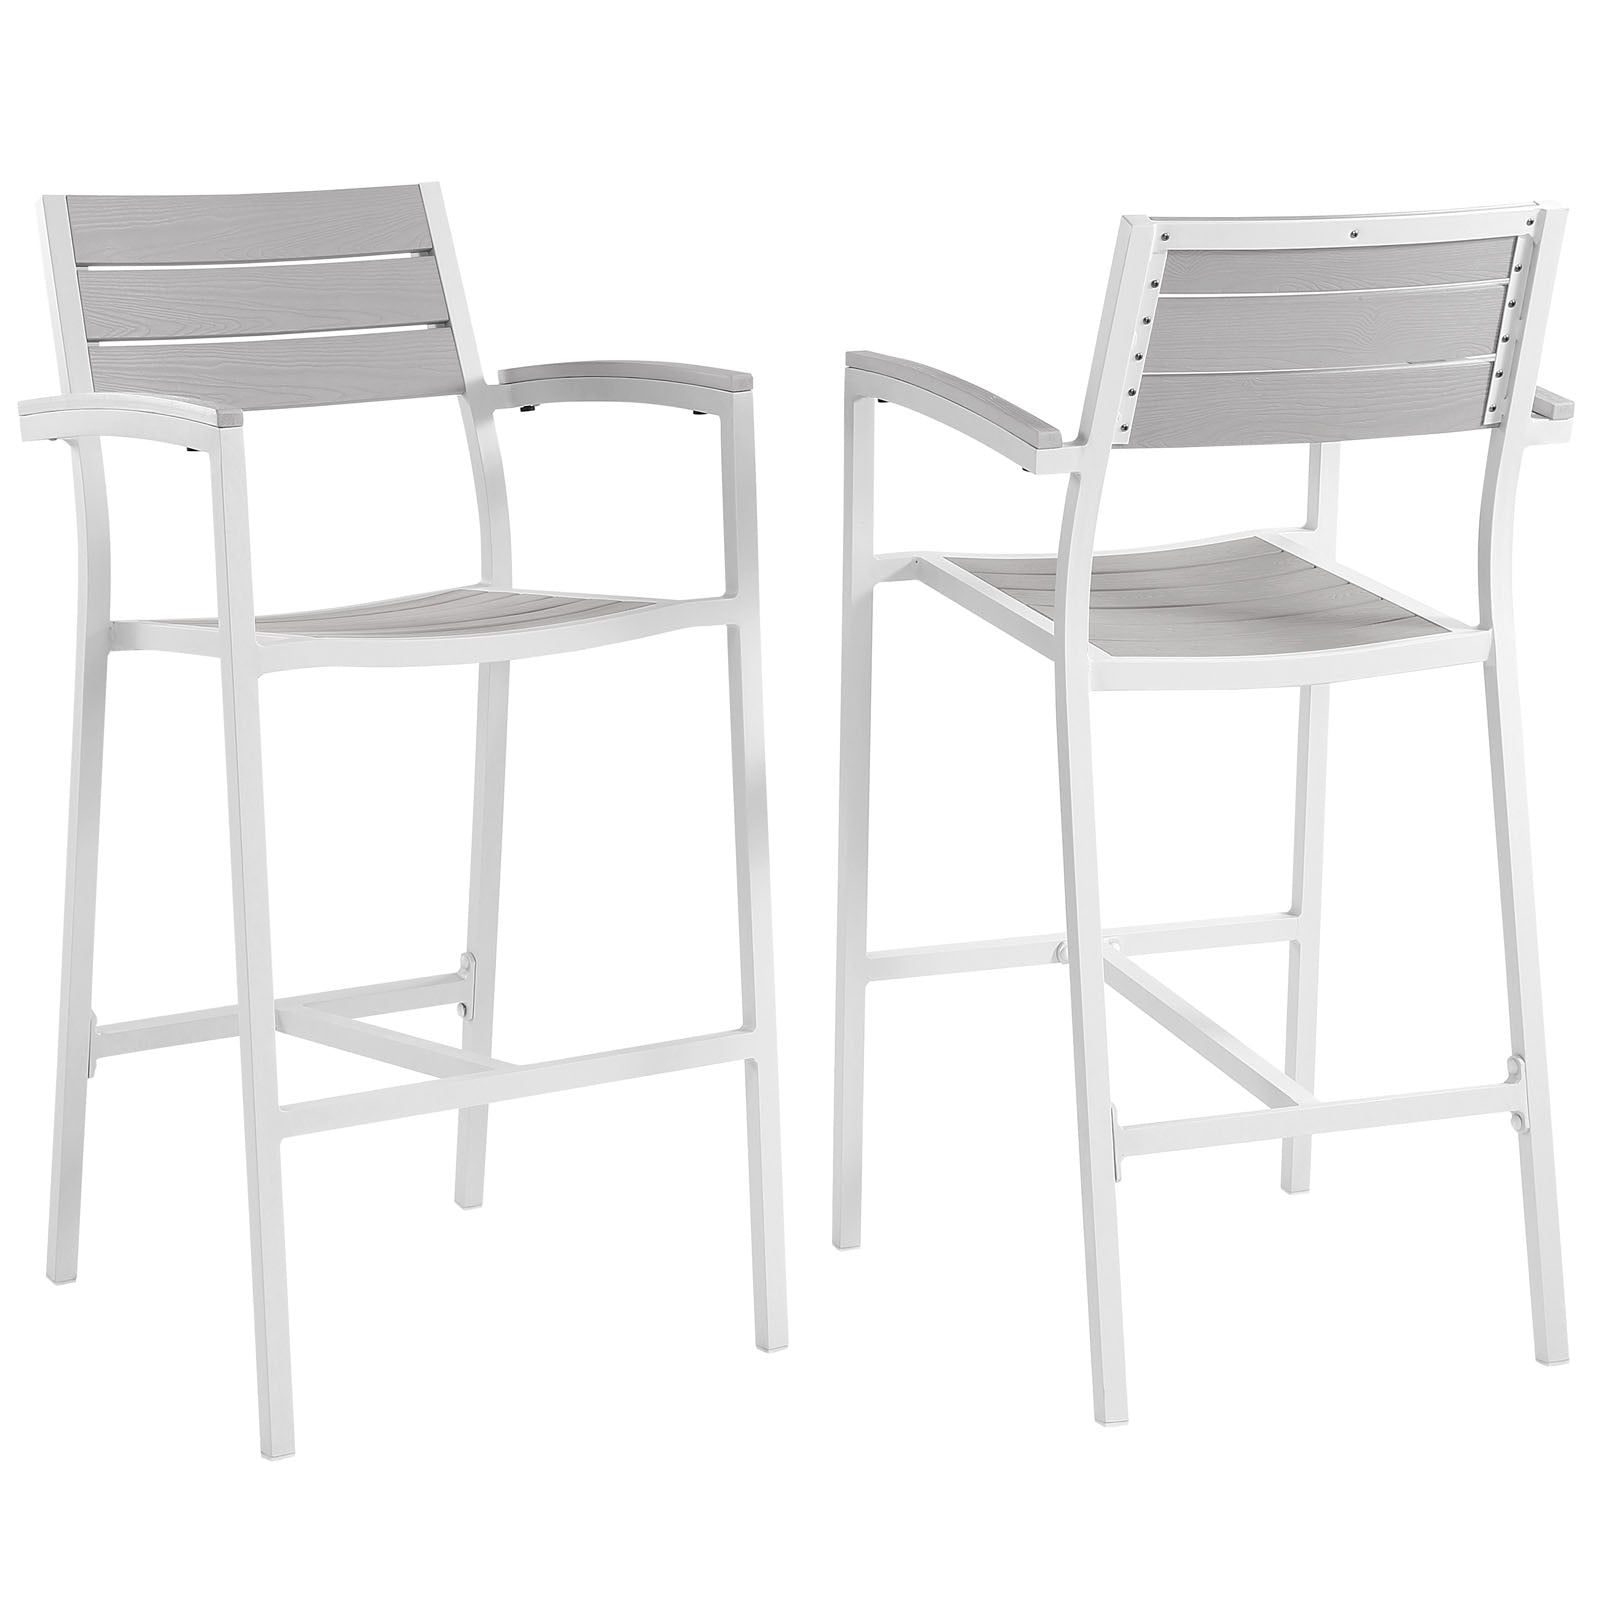 Modway Outdoor Barstools - Maine Outdoor Barstool White & Light Gray (Set of 2)